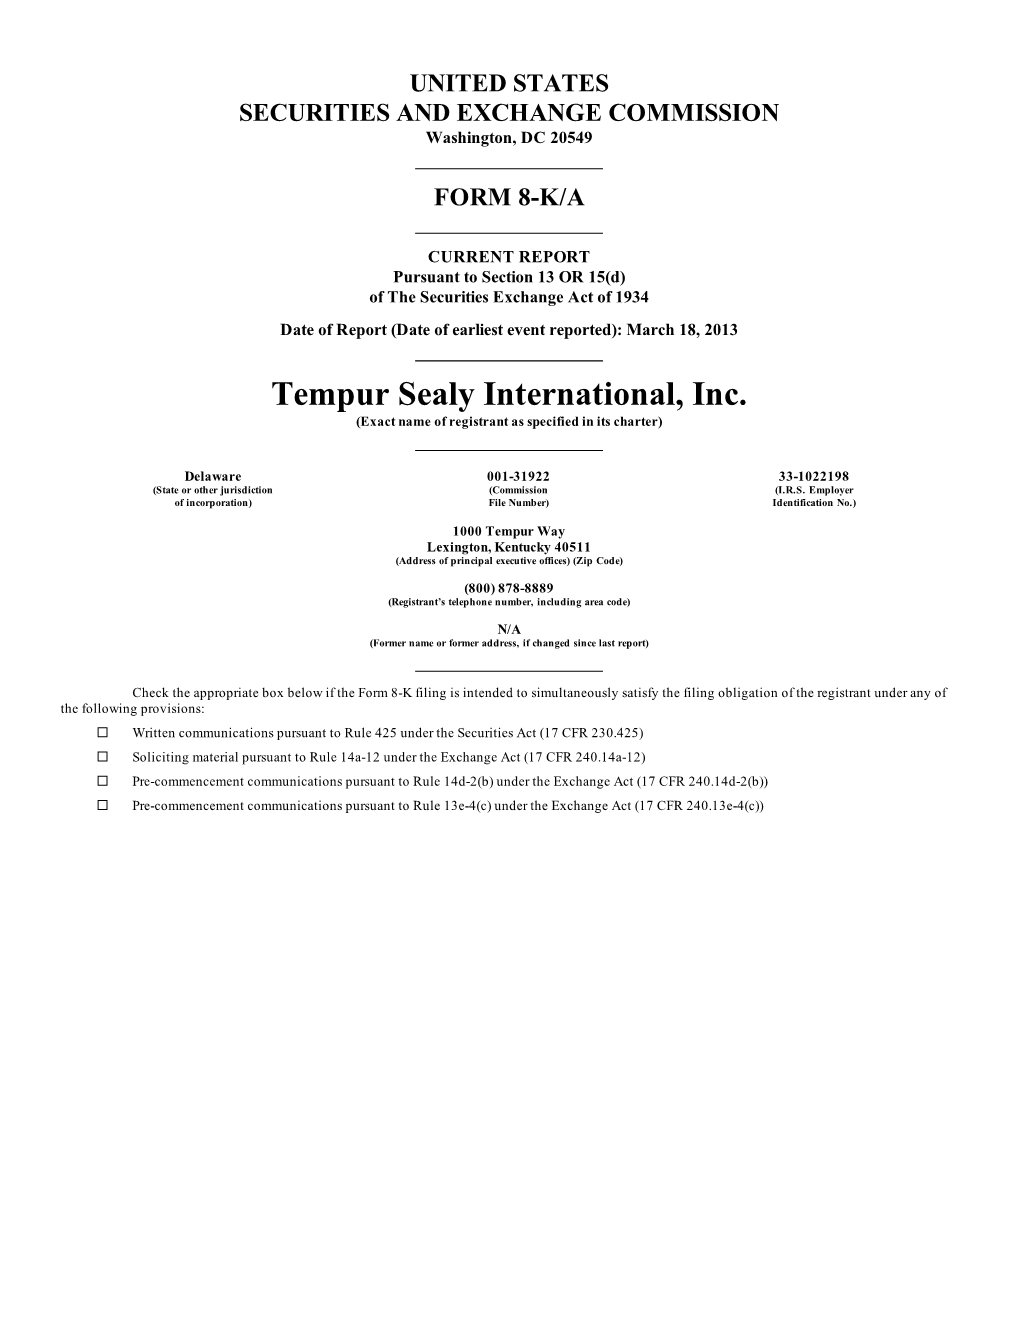 Tempur Sealy International, Inc. (Exact Name of Registrant As Specified in Its Charter)